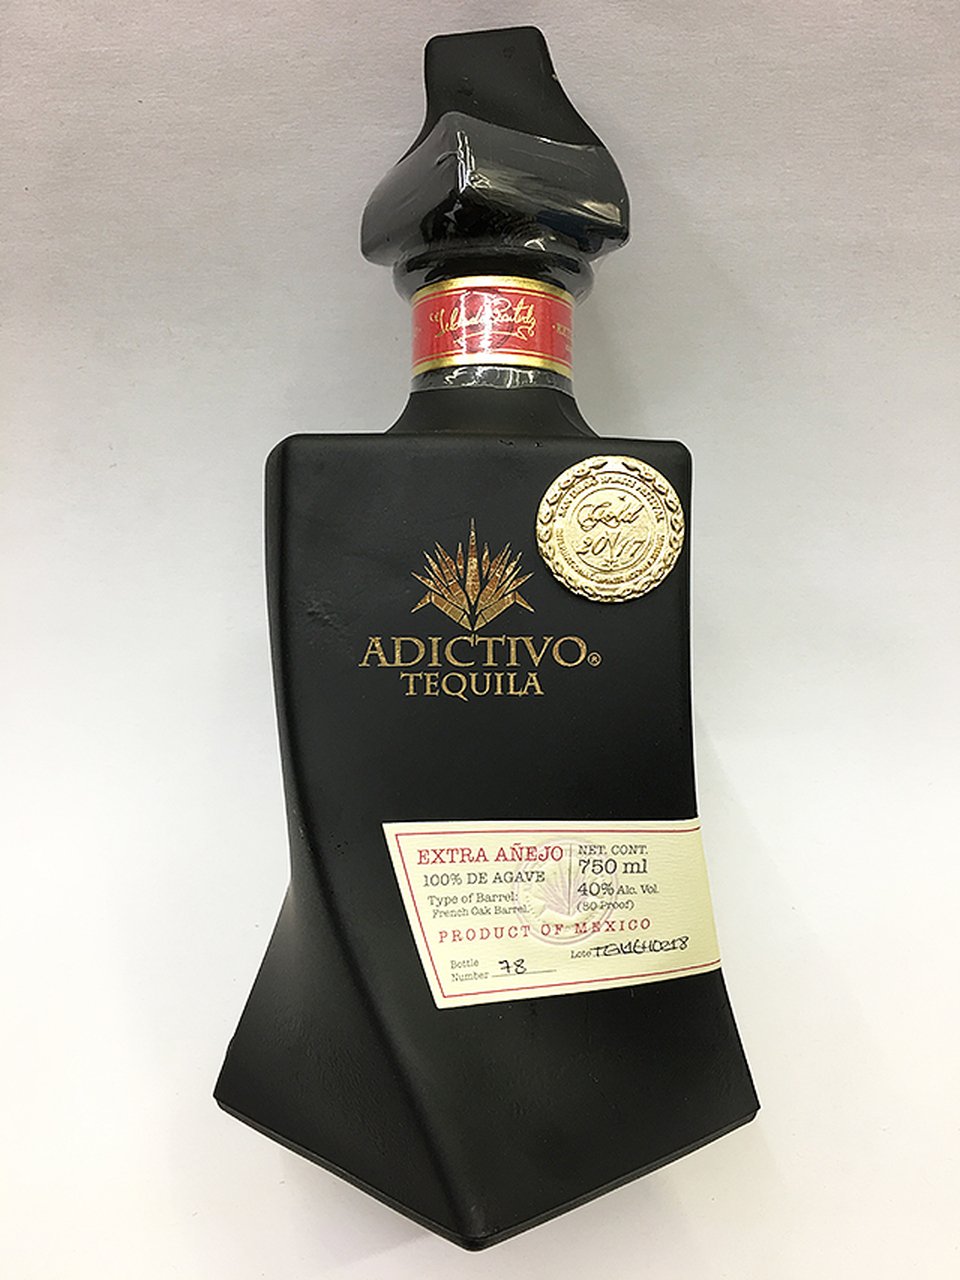 Adictivo Extra Anejo Black Limited Edition Tequila